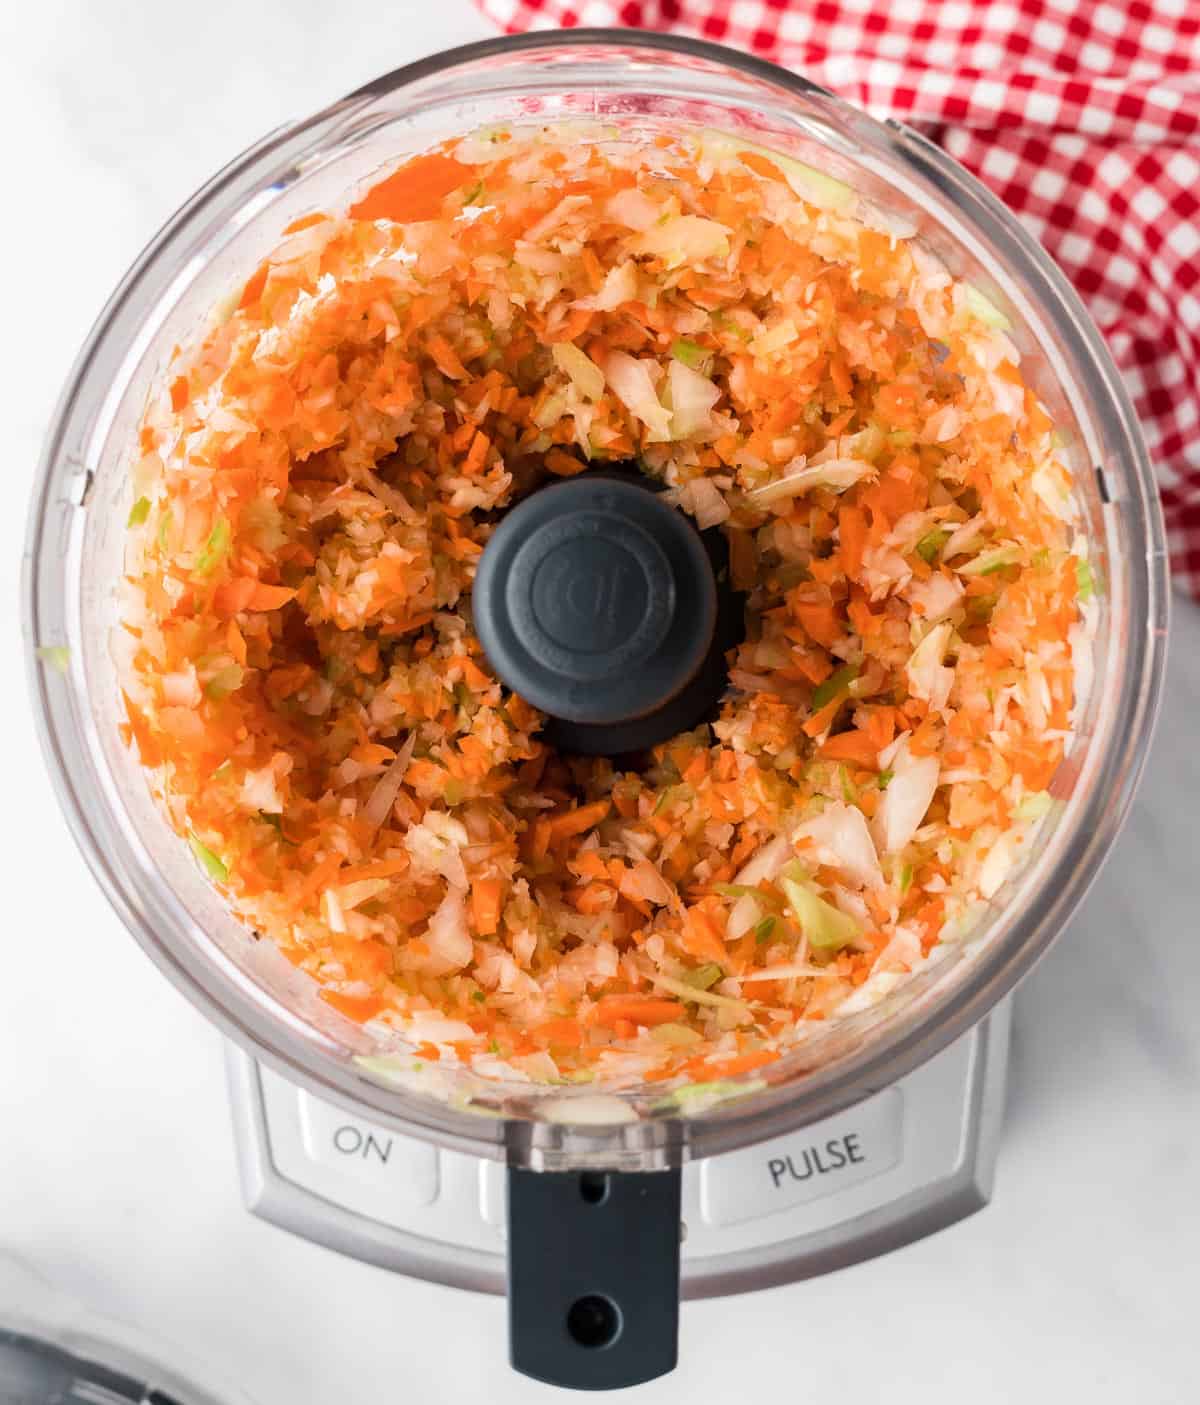 celery, garlic, carrots, and onion ground up in the food processor